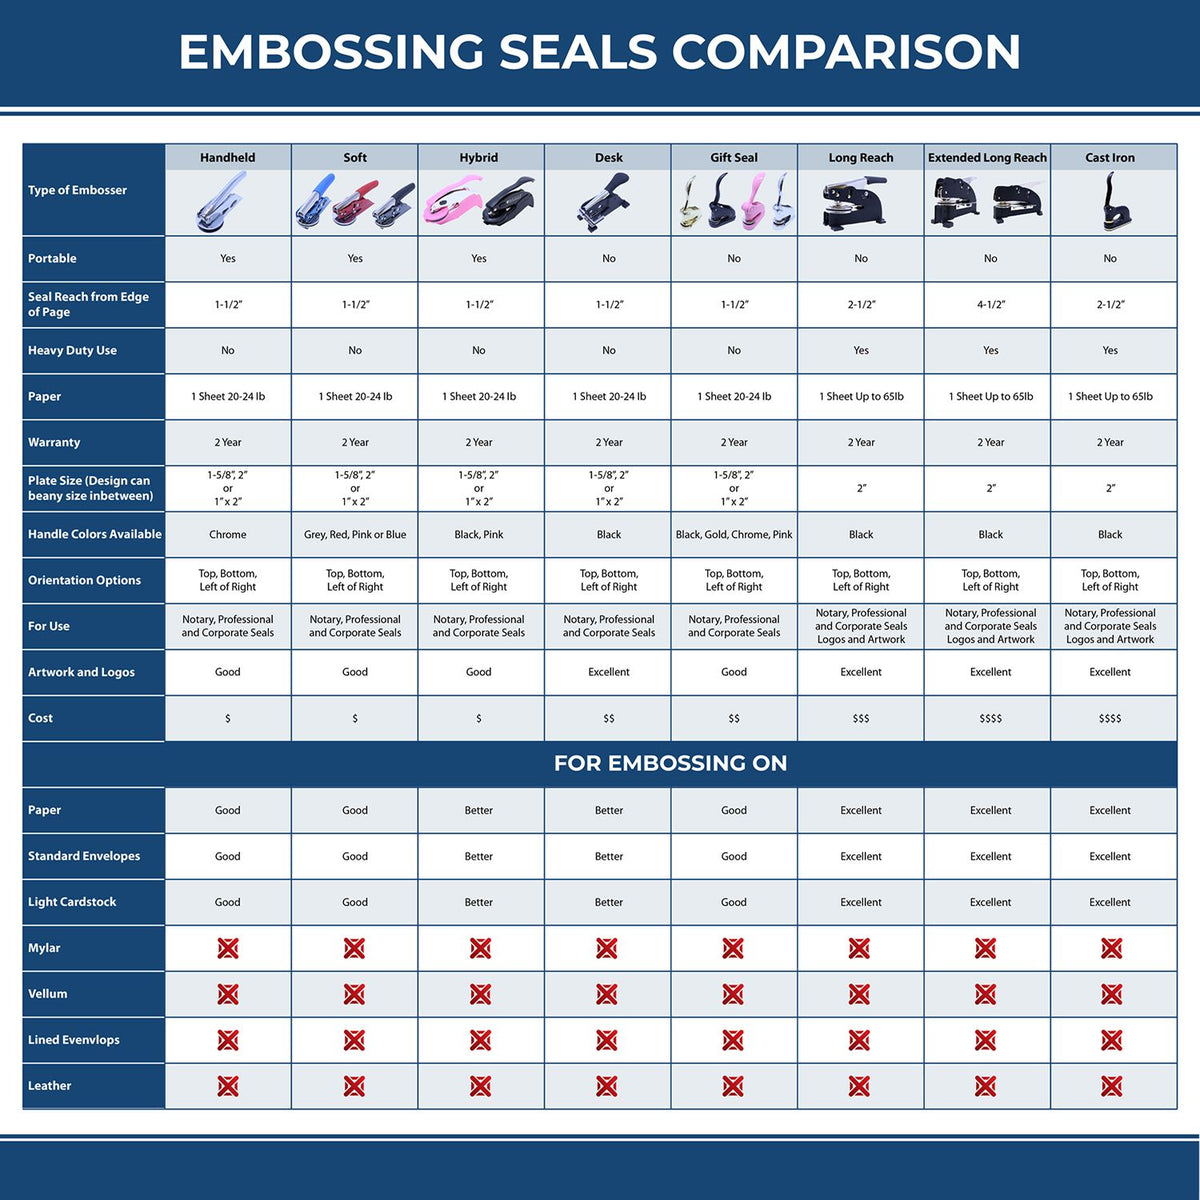 A comparison chart for the different types of mount models available for the Handheld Colorado Professional Geologist Embosser